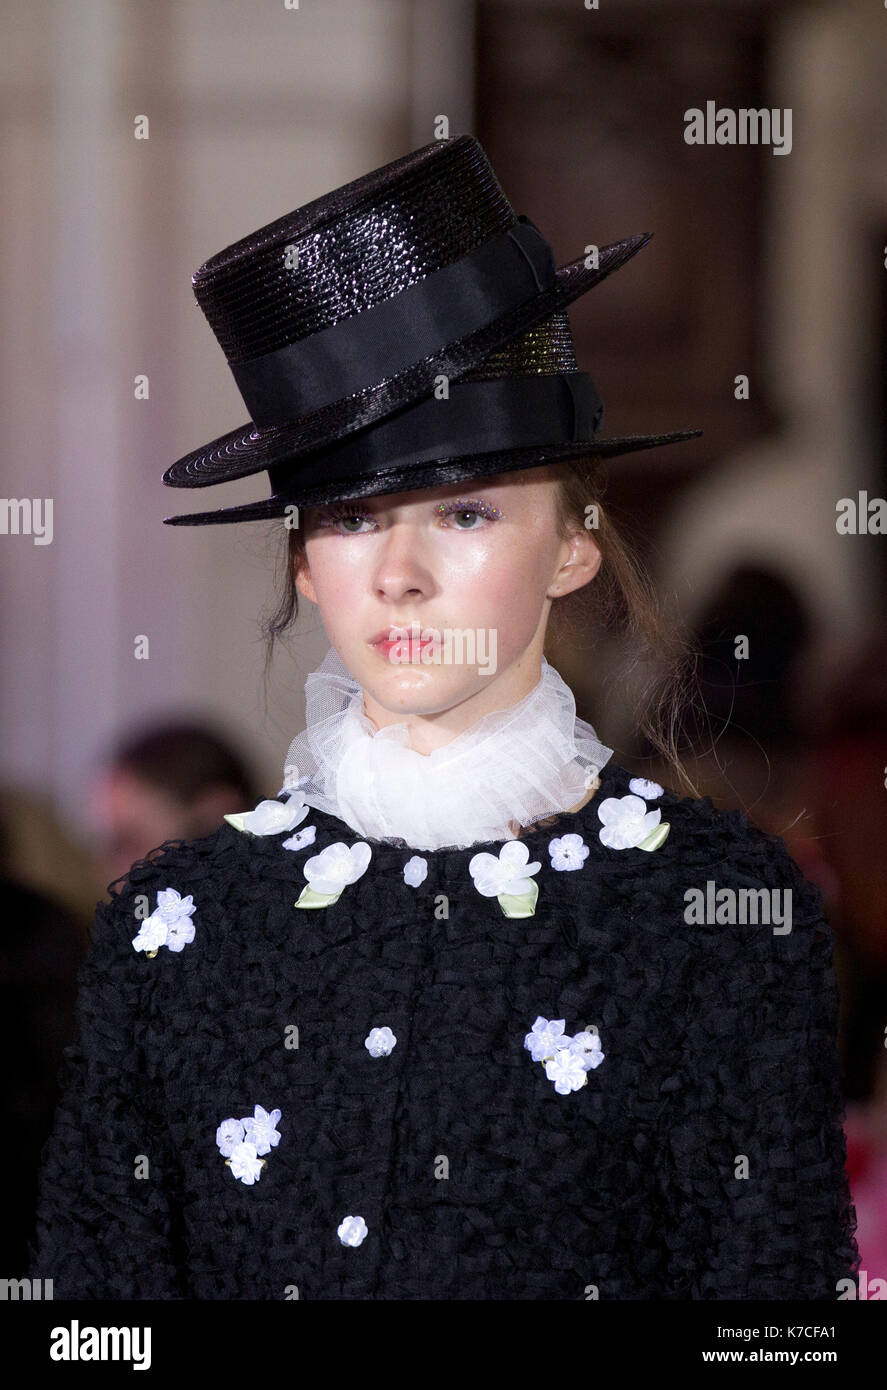 Models on the catwalk during the Ryan LO London Fashion Week SS18 show held at St Sepulchre-without-Newgate Church, London. Stock Photo